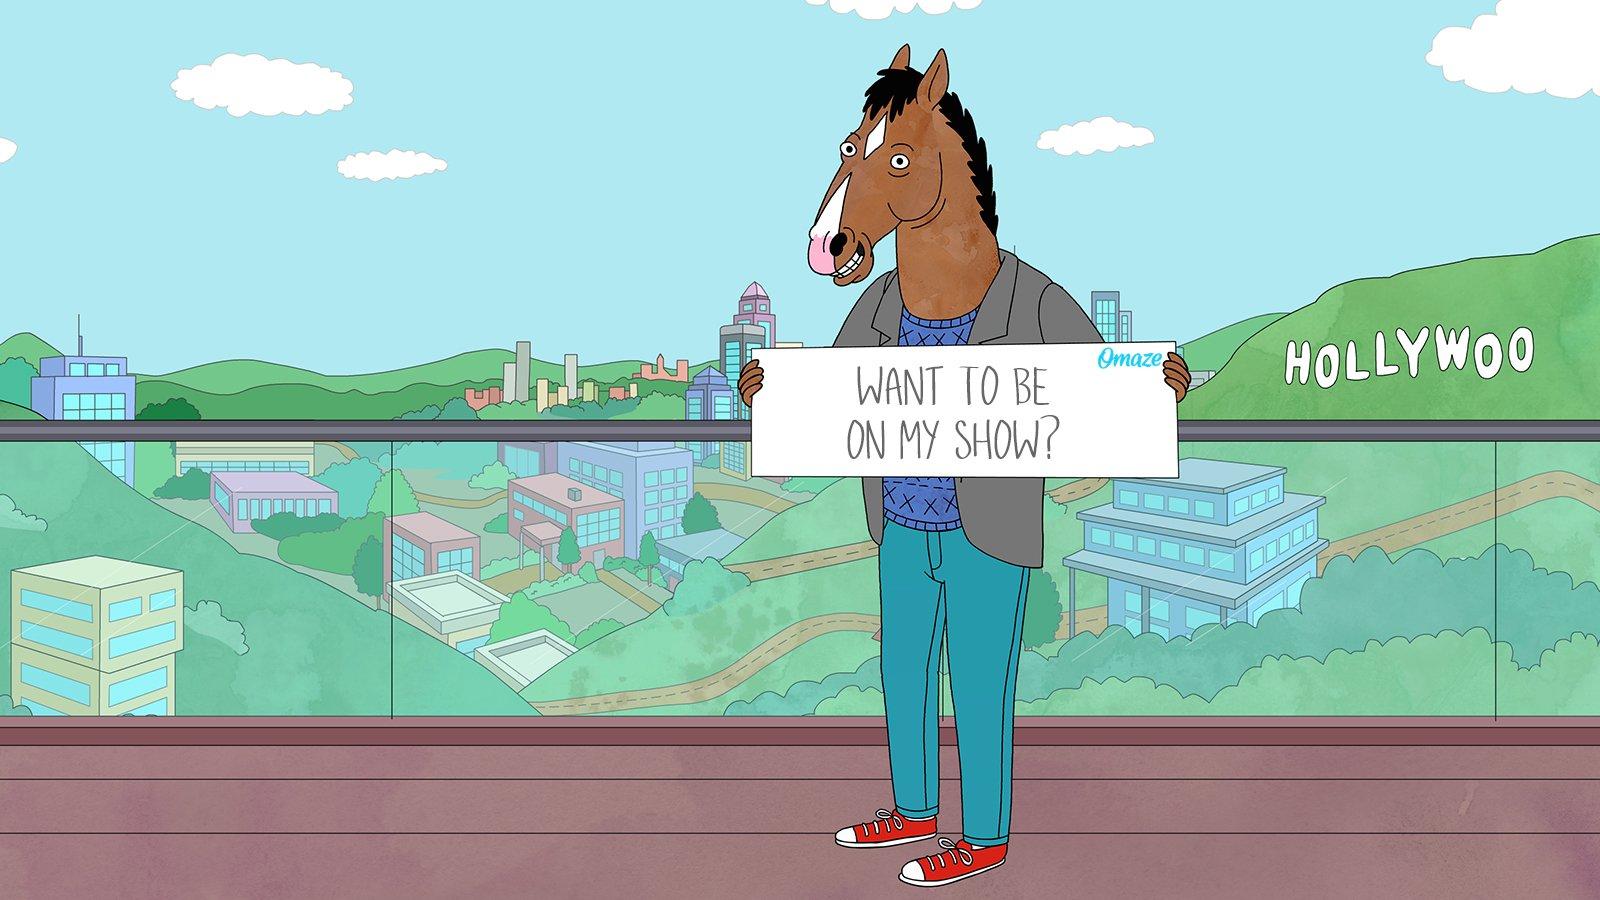 Be Drawn Into BoJack Horseman & Join the Cast at Their Final